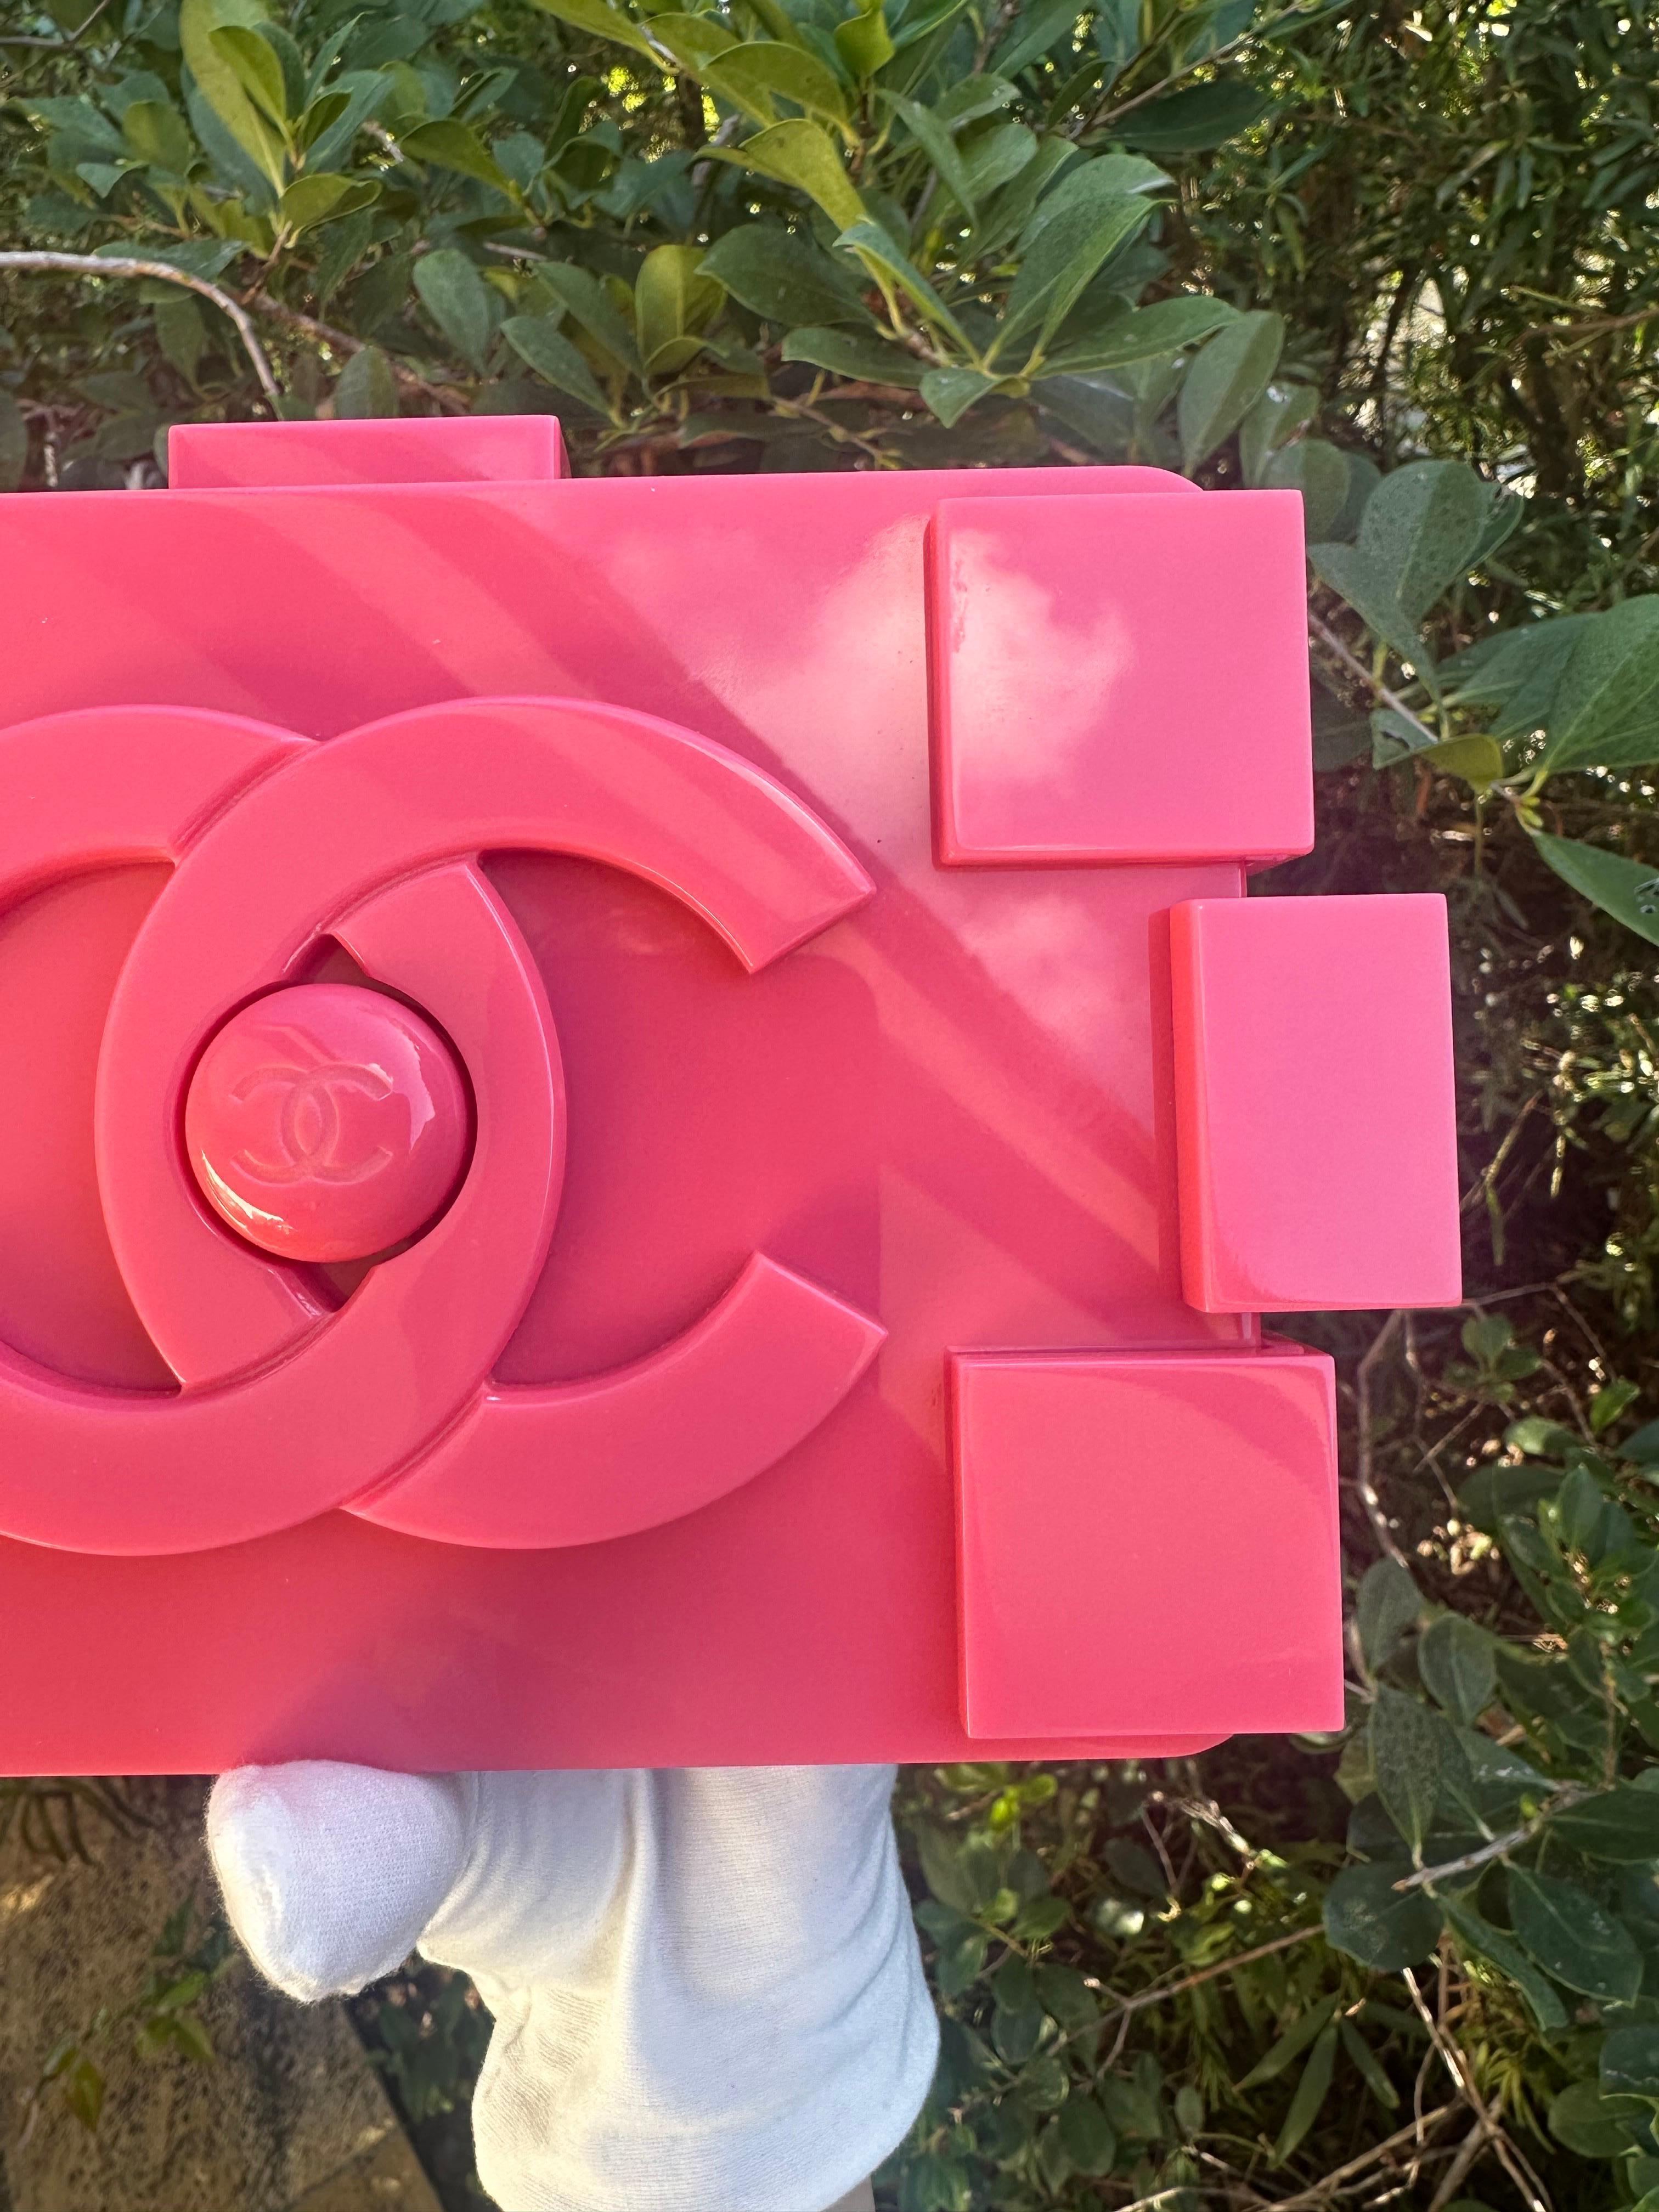 Chanel Plexiglass Pink Brick Lego Clutch Bag

2012 Barcode Boy Brick Lego shoulder bag

Called by critic Tim Blanks ‘the ever-younger spirit of Karl’s Chanel’, the Boy Brick Lego bag from Chanel was created by Karl Lagerfeld for the brand’s SS13